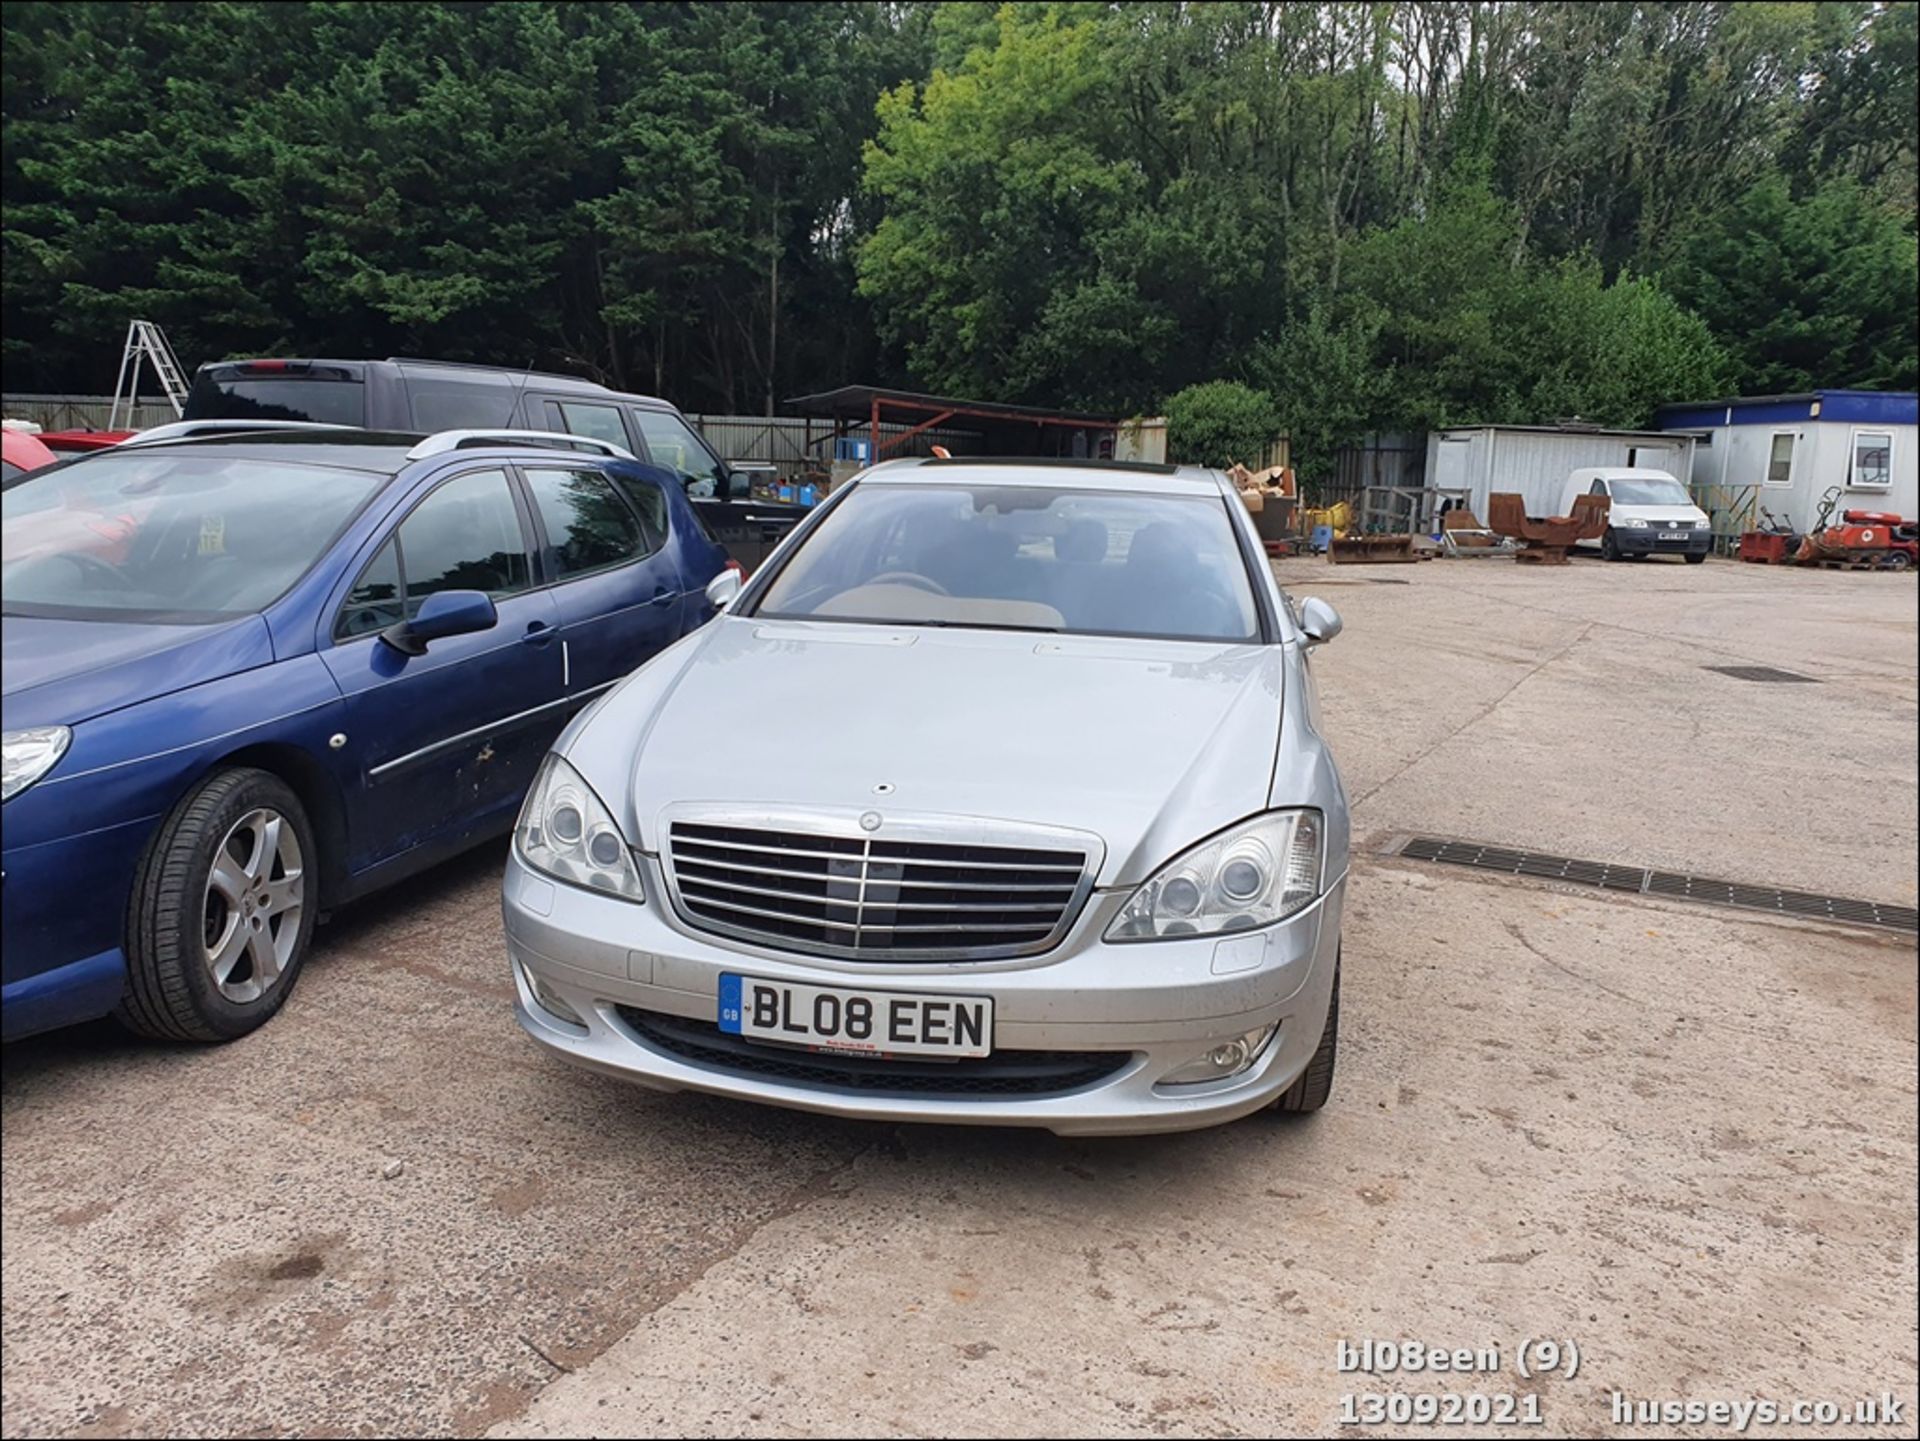 08/08 MERCEDES S320 CDI AUTO - 2987cc 4dr Saloon (Silver, 205k) - Image 9 of 16